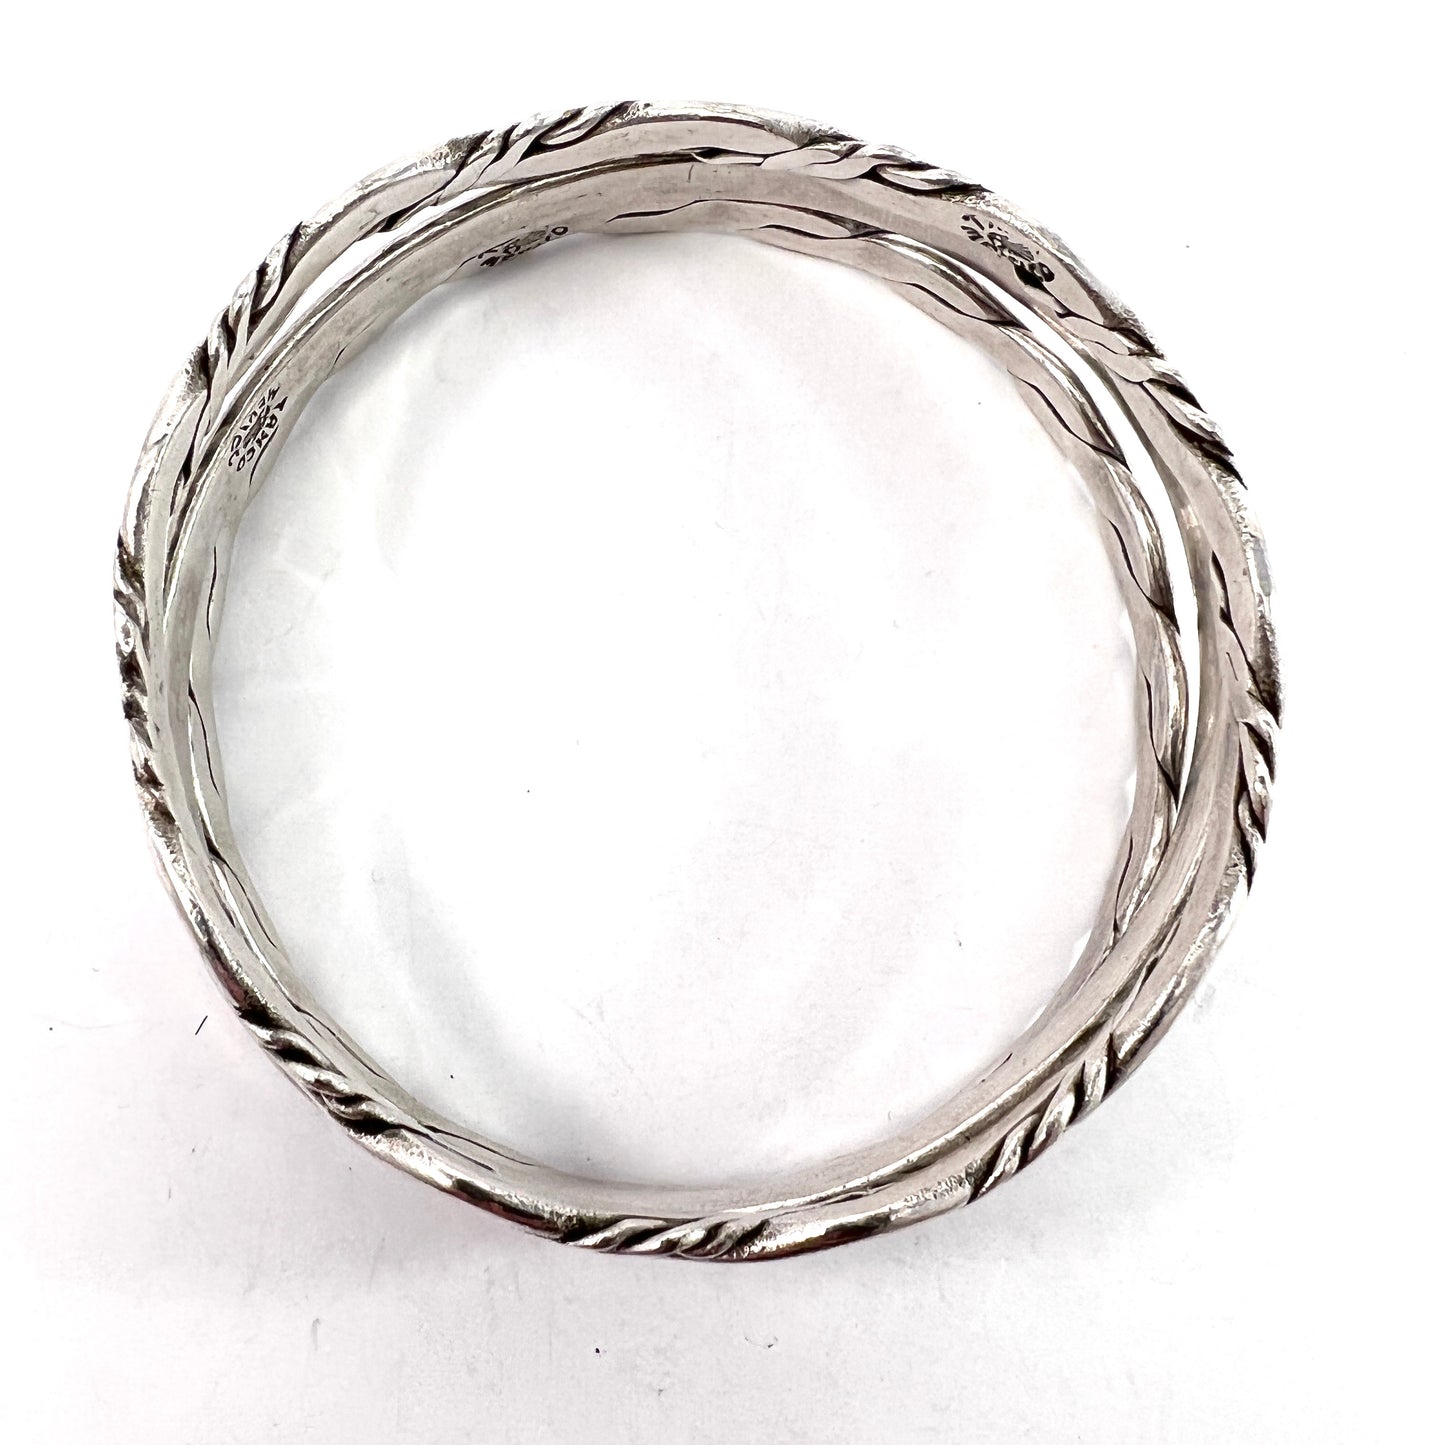 Taxco, Mexico. Vintage Sterling Silver Bangle Stack.